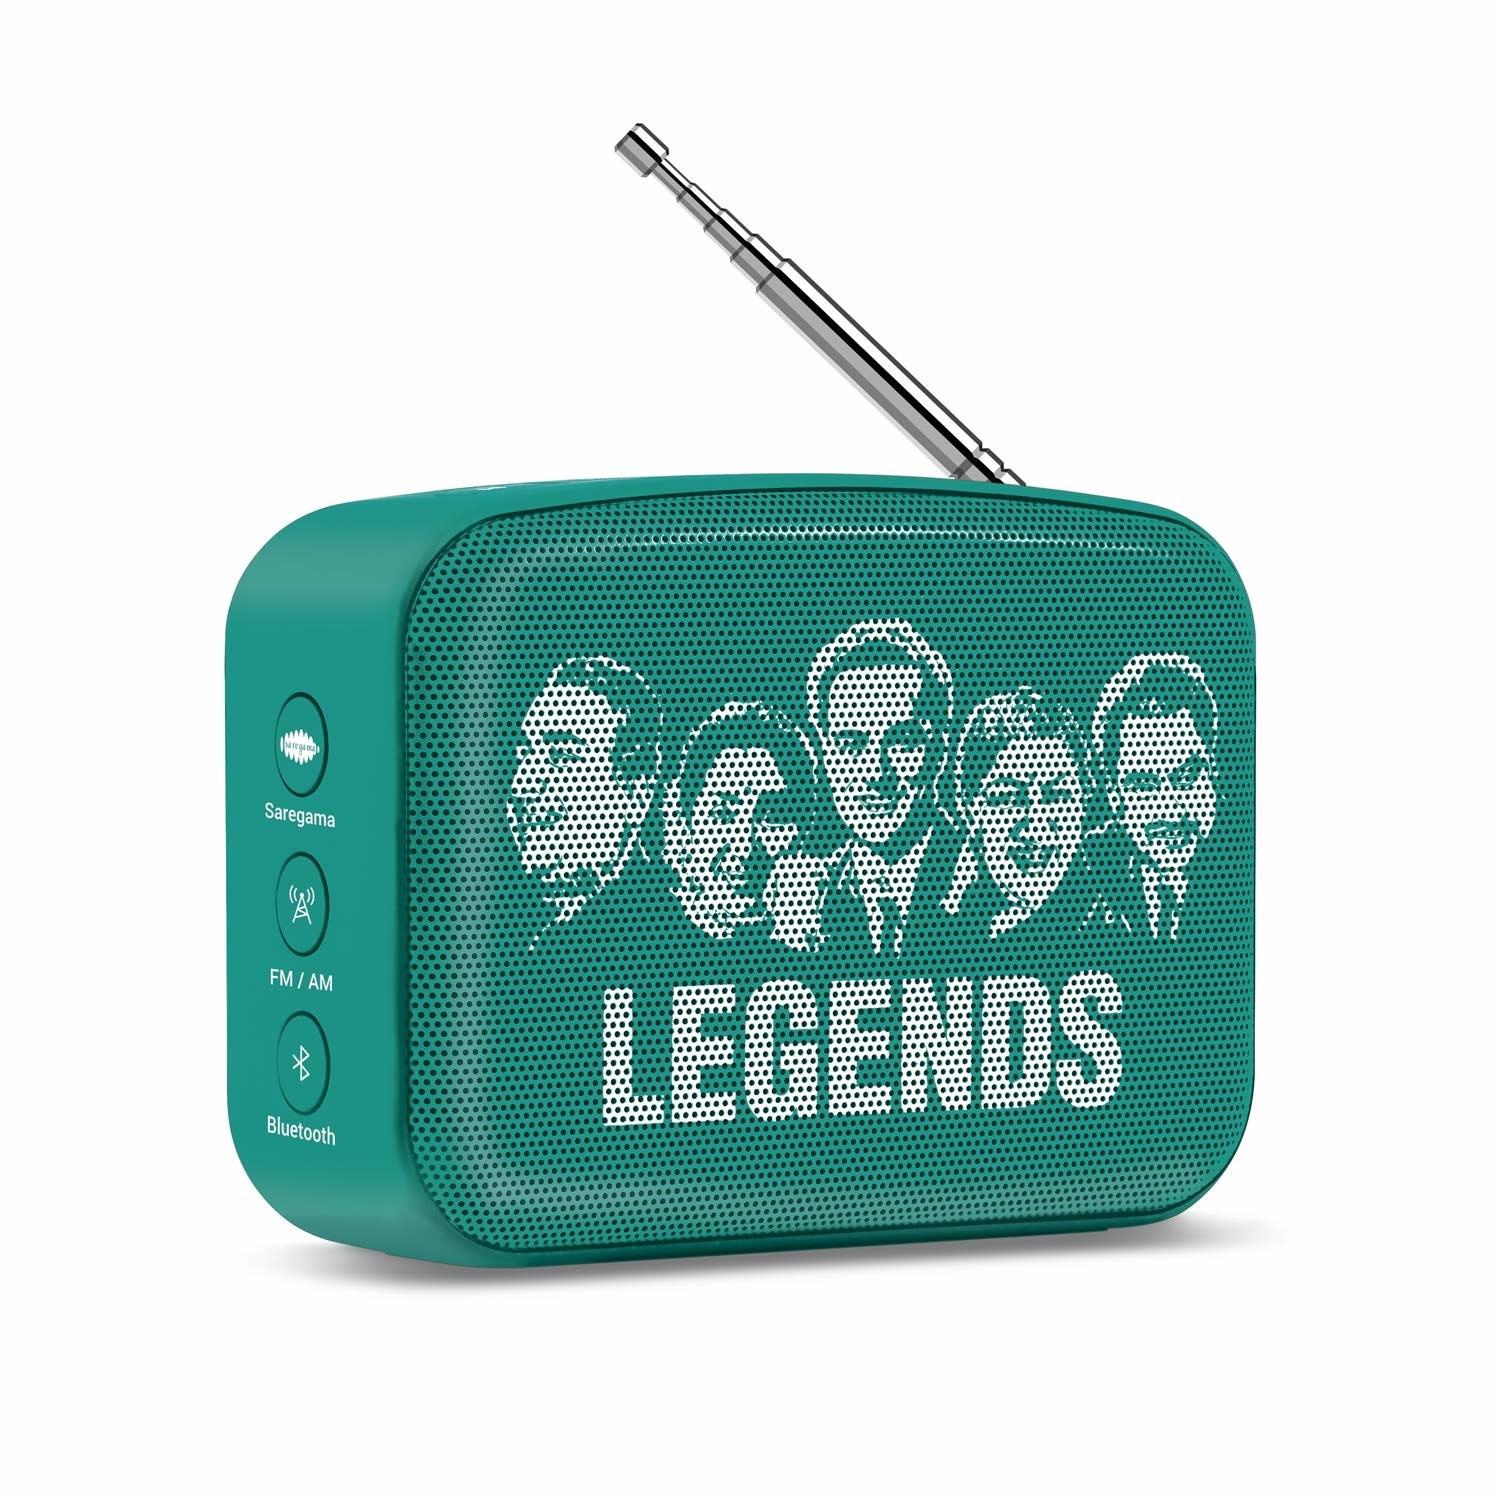 A mint-green Saregama Caravan mini player with the words Legends written on it in white along with images of legendary singers from Hindi cinema